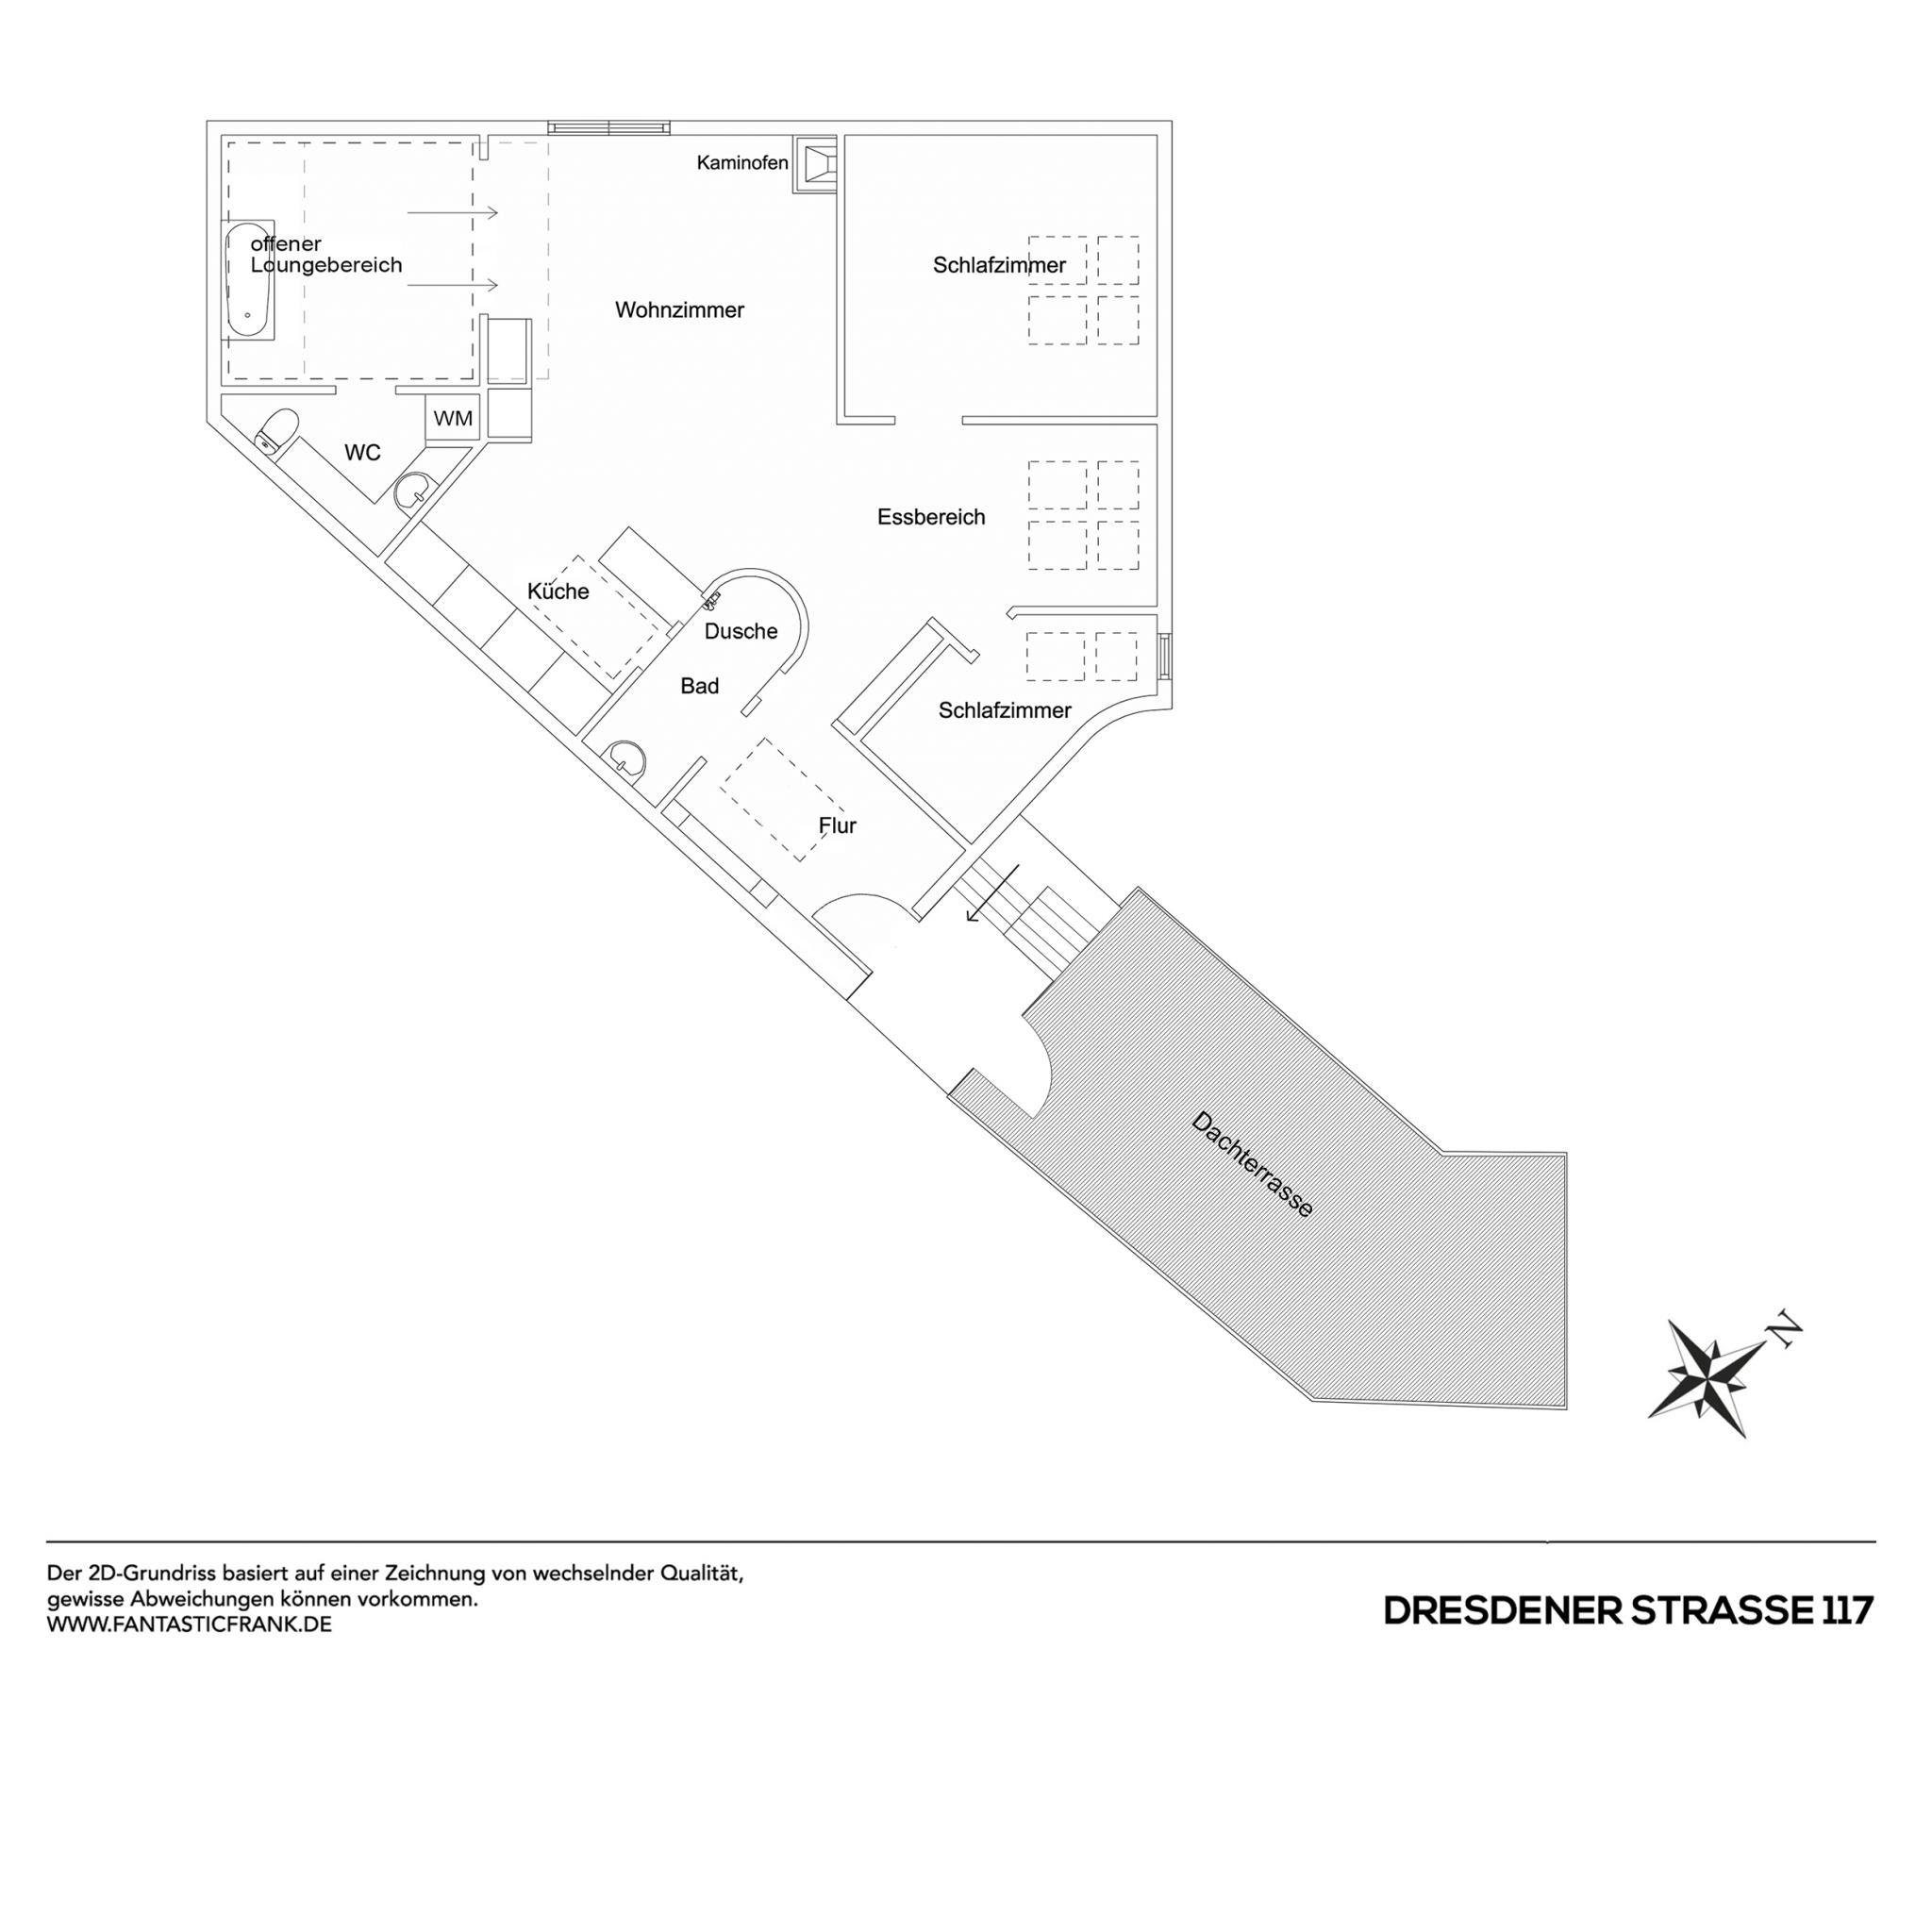 The image features a large, open floor plan with a white background, divided into two sections. The first section is a large room with a kitchen, dining area, and living room, while the second section is a smaller room with a bedroom and bathroom. The floor plan is divided into two sections, with the first section being the larger room and the second section being the smaller room.